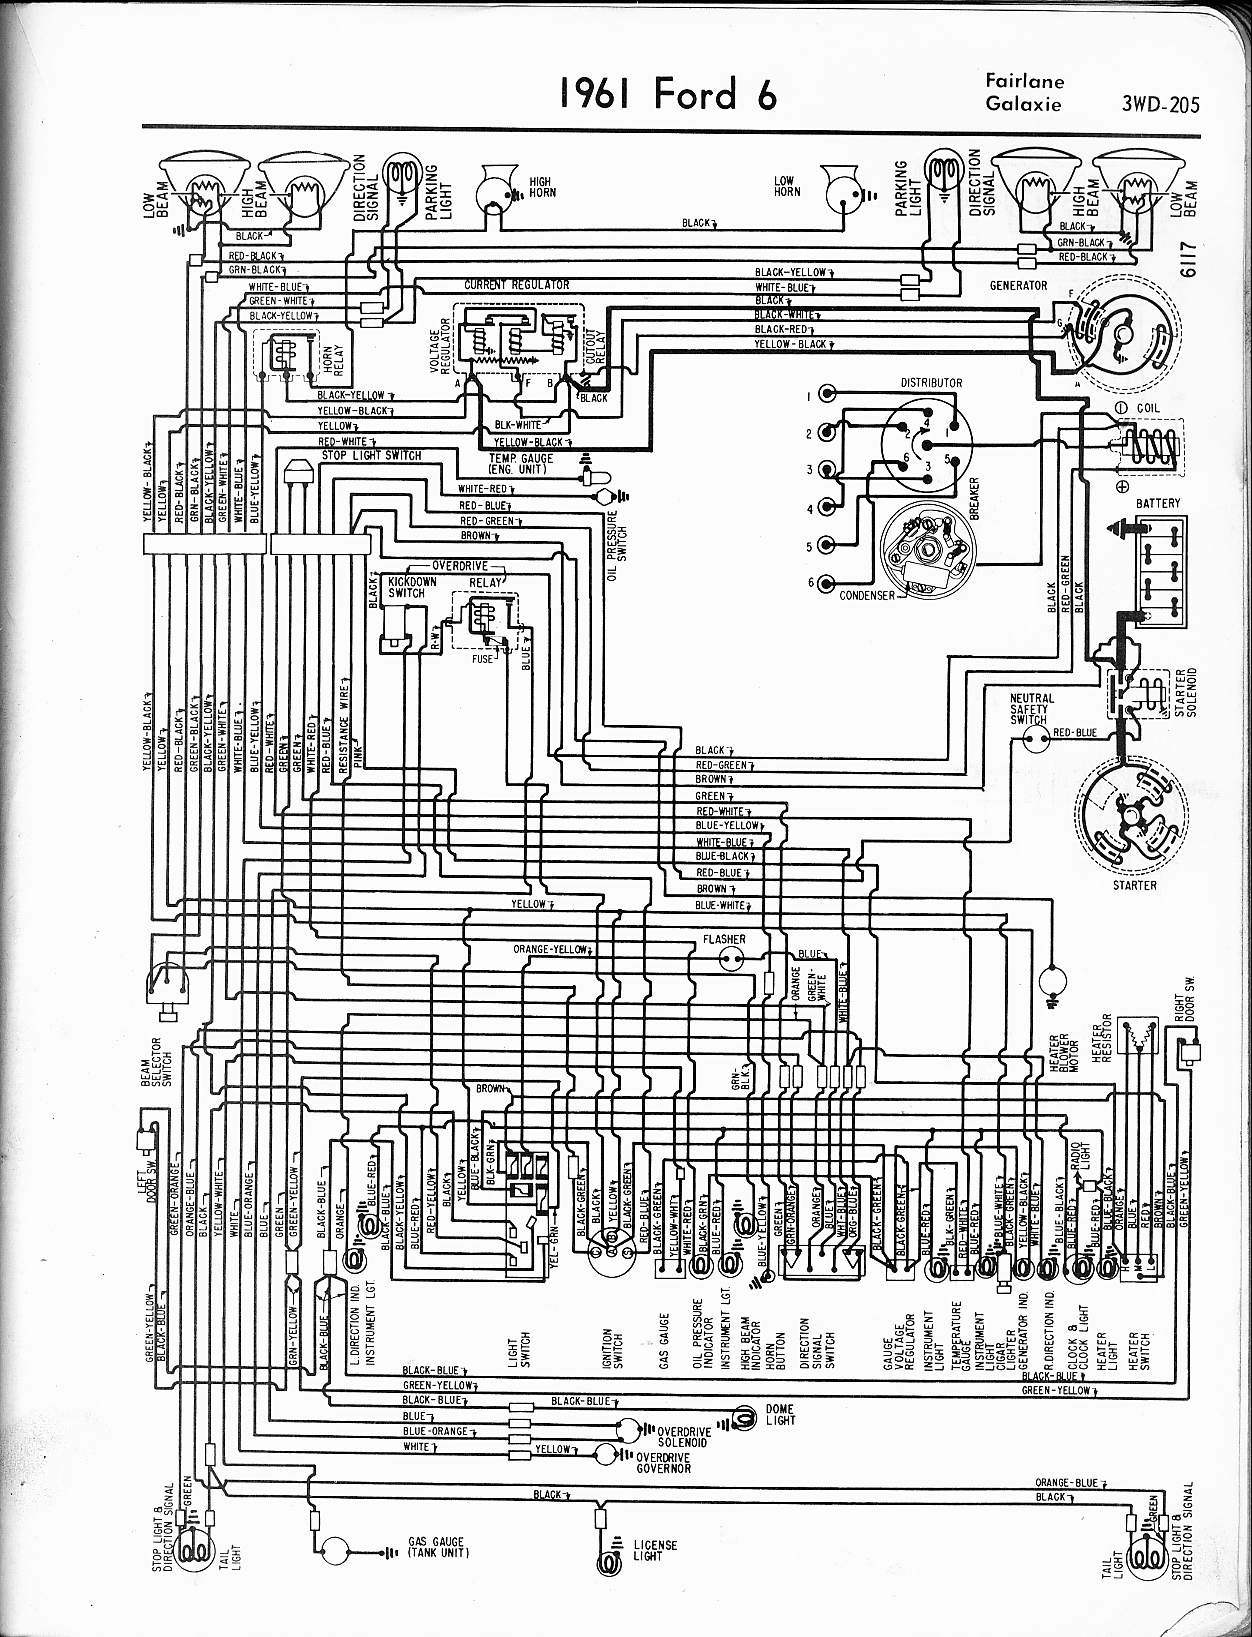 1965 Ford Falcon Wiring Diagram from www.oldcarmanualproject.com